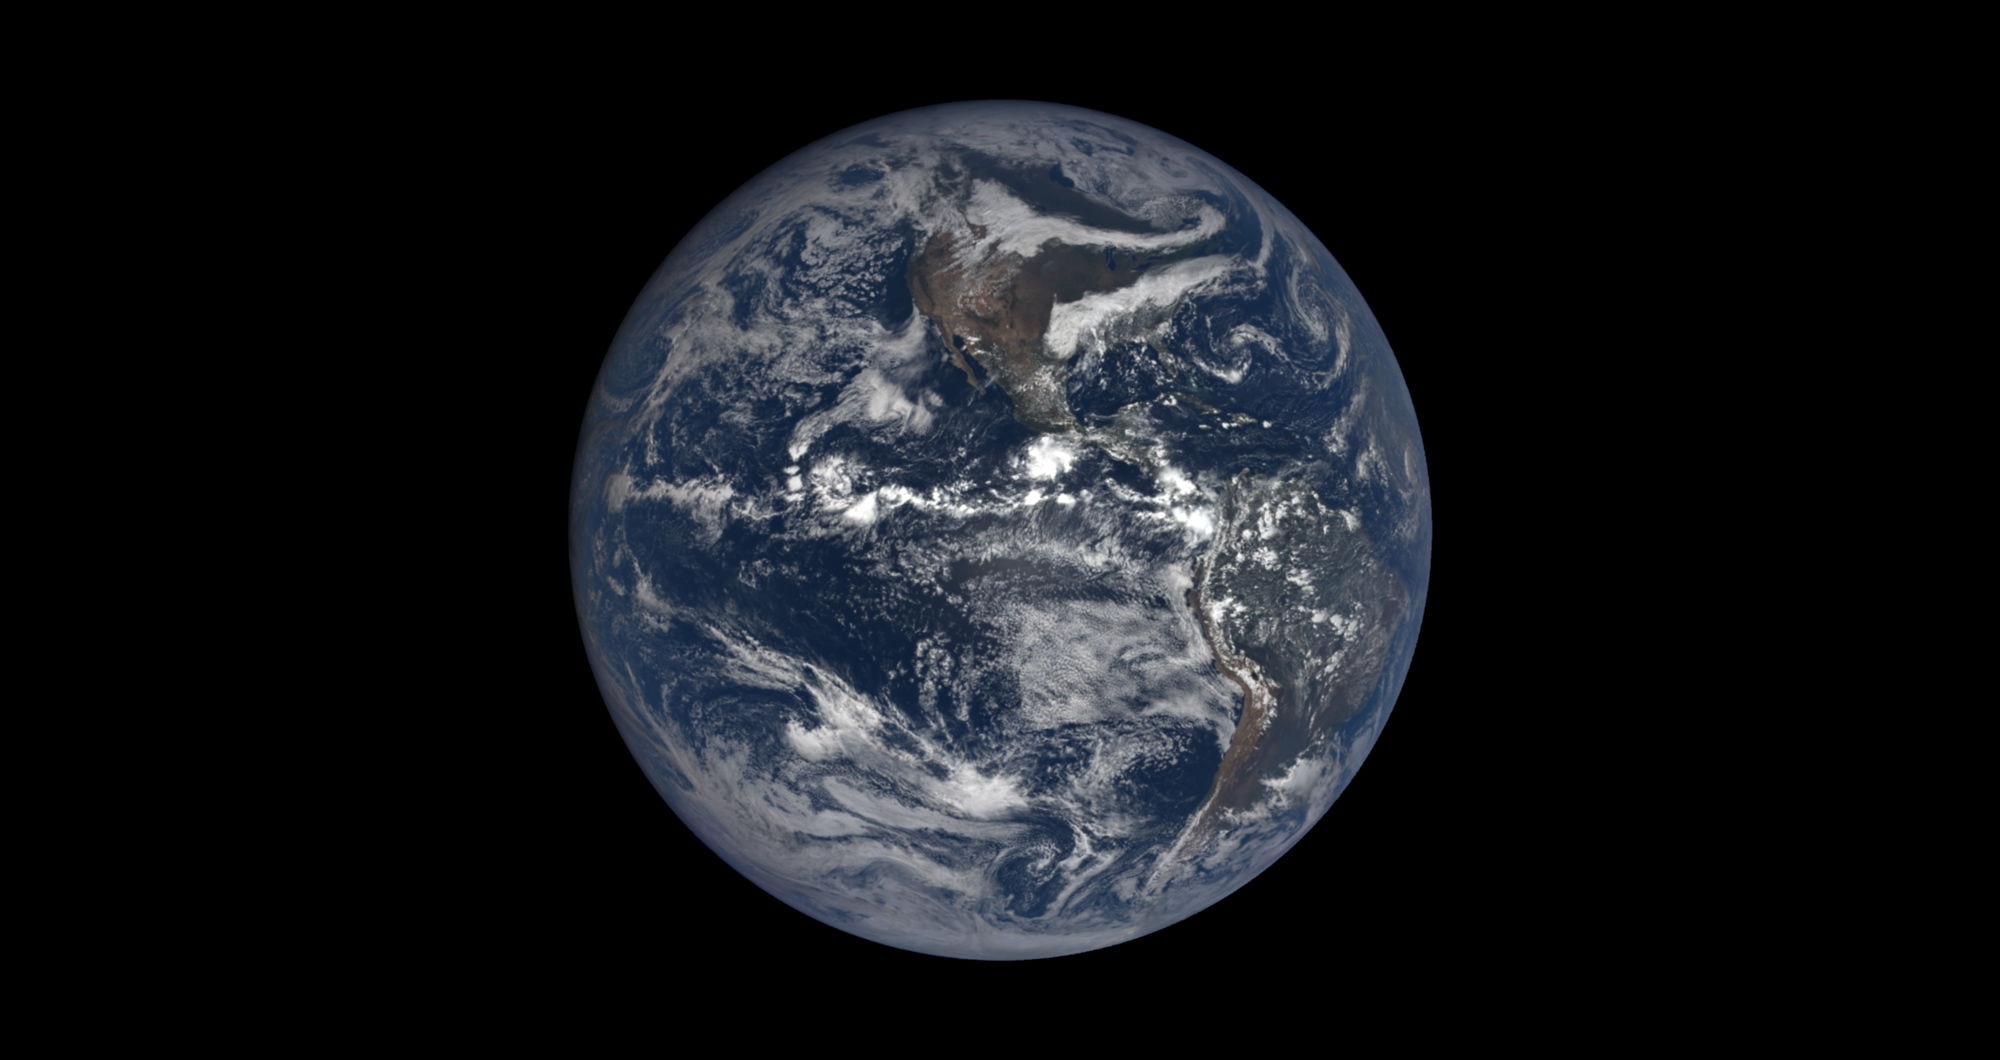 The Earth seen from the DSCOVR spacecraft on Sep. 23, 2018, on the equinox. Credit: NASA/NOAO